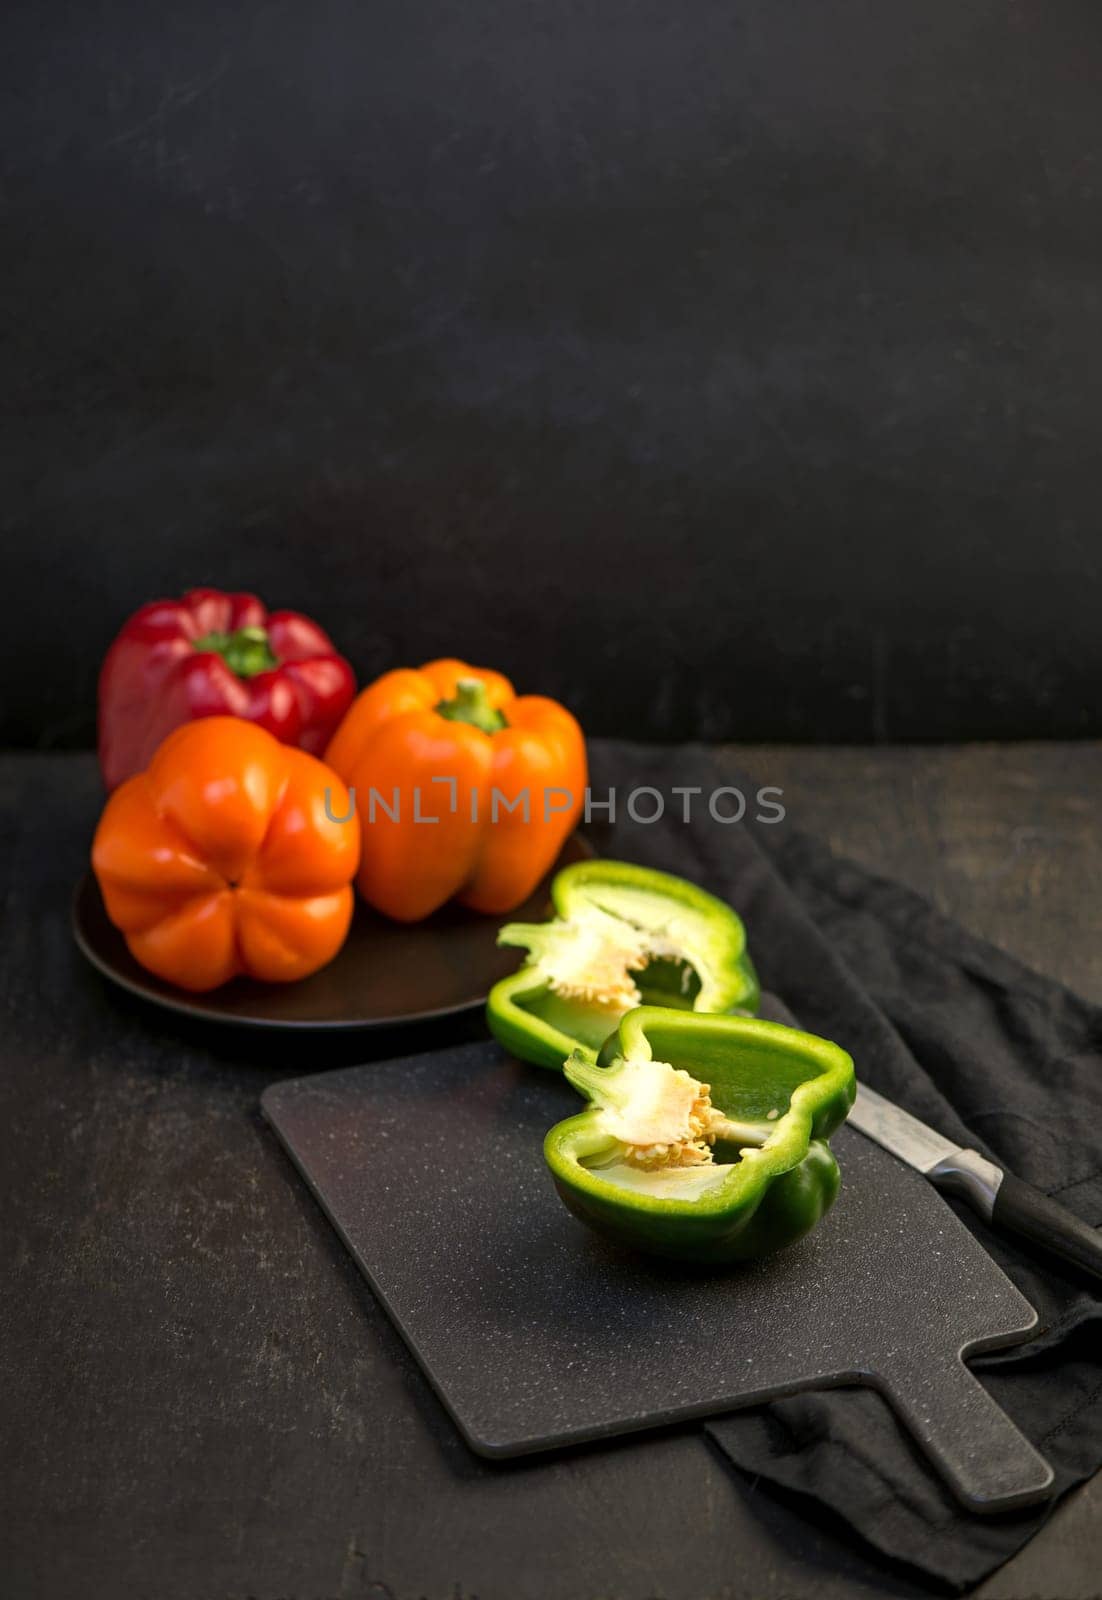 sweet pepper, red, green, yellow pepper on black background, full depth of field by aprilphoto